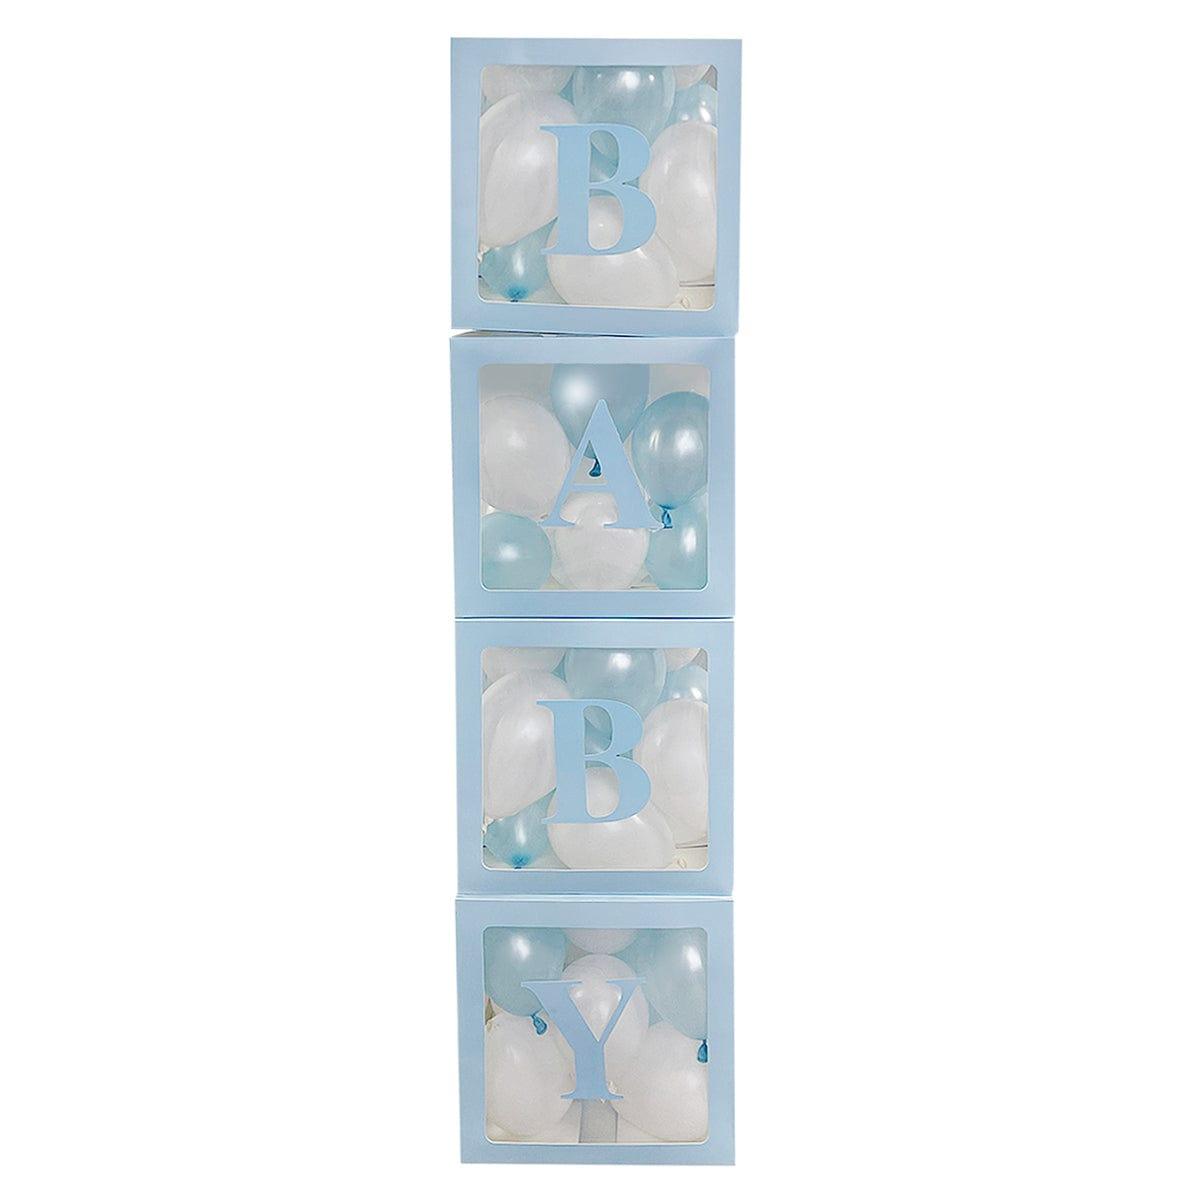 Yiwu PaiJing Import & Export Co., Ltd Baby Shower Light Blue Clear Balloon Boxes with "Baby" Letters, 4 Count